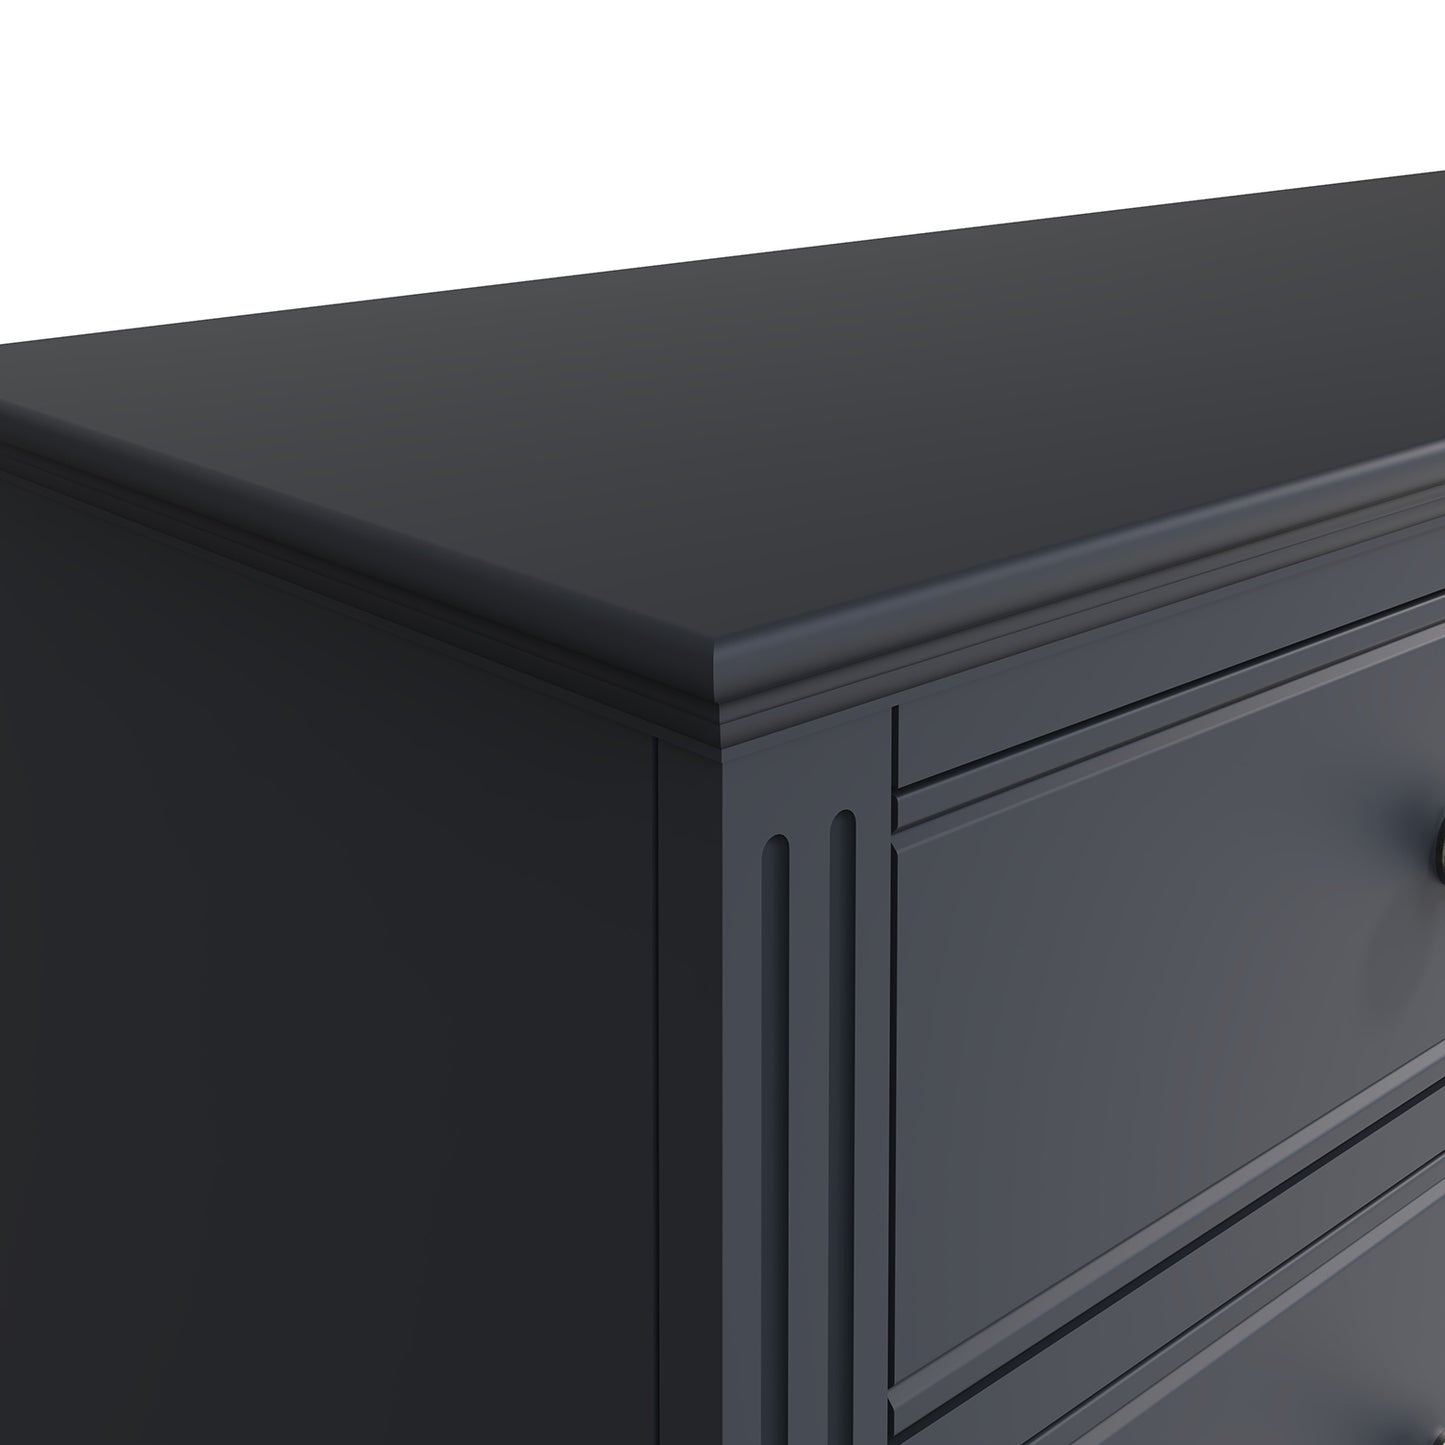 Billingford Charcoal Chest of Drawers - 6 Drawer